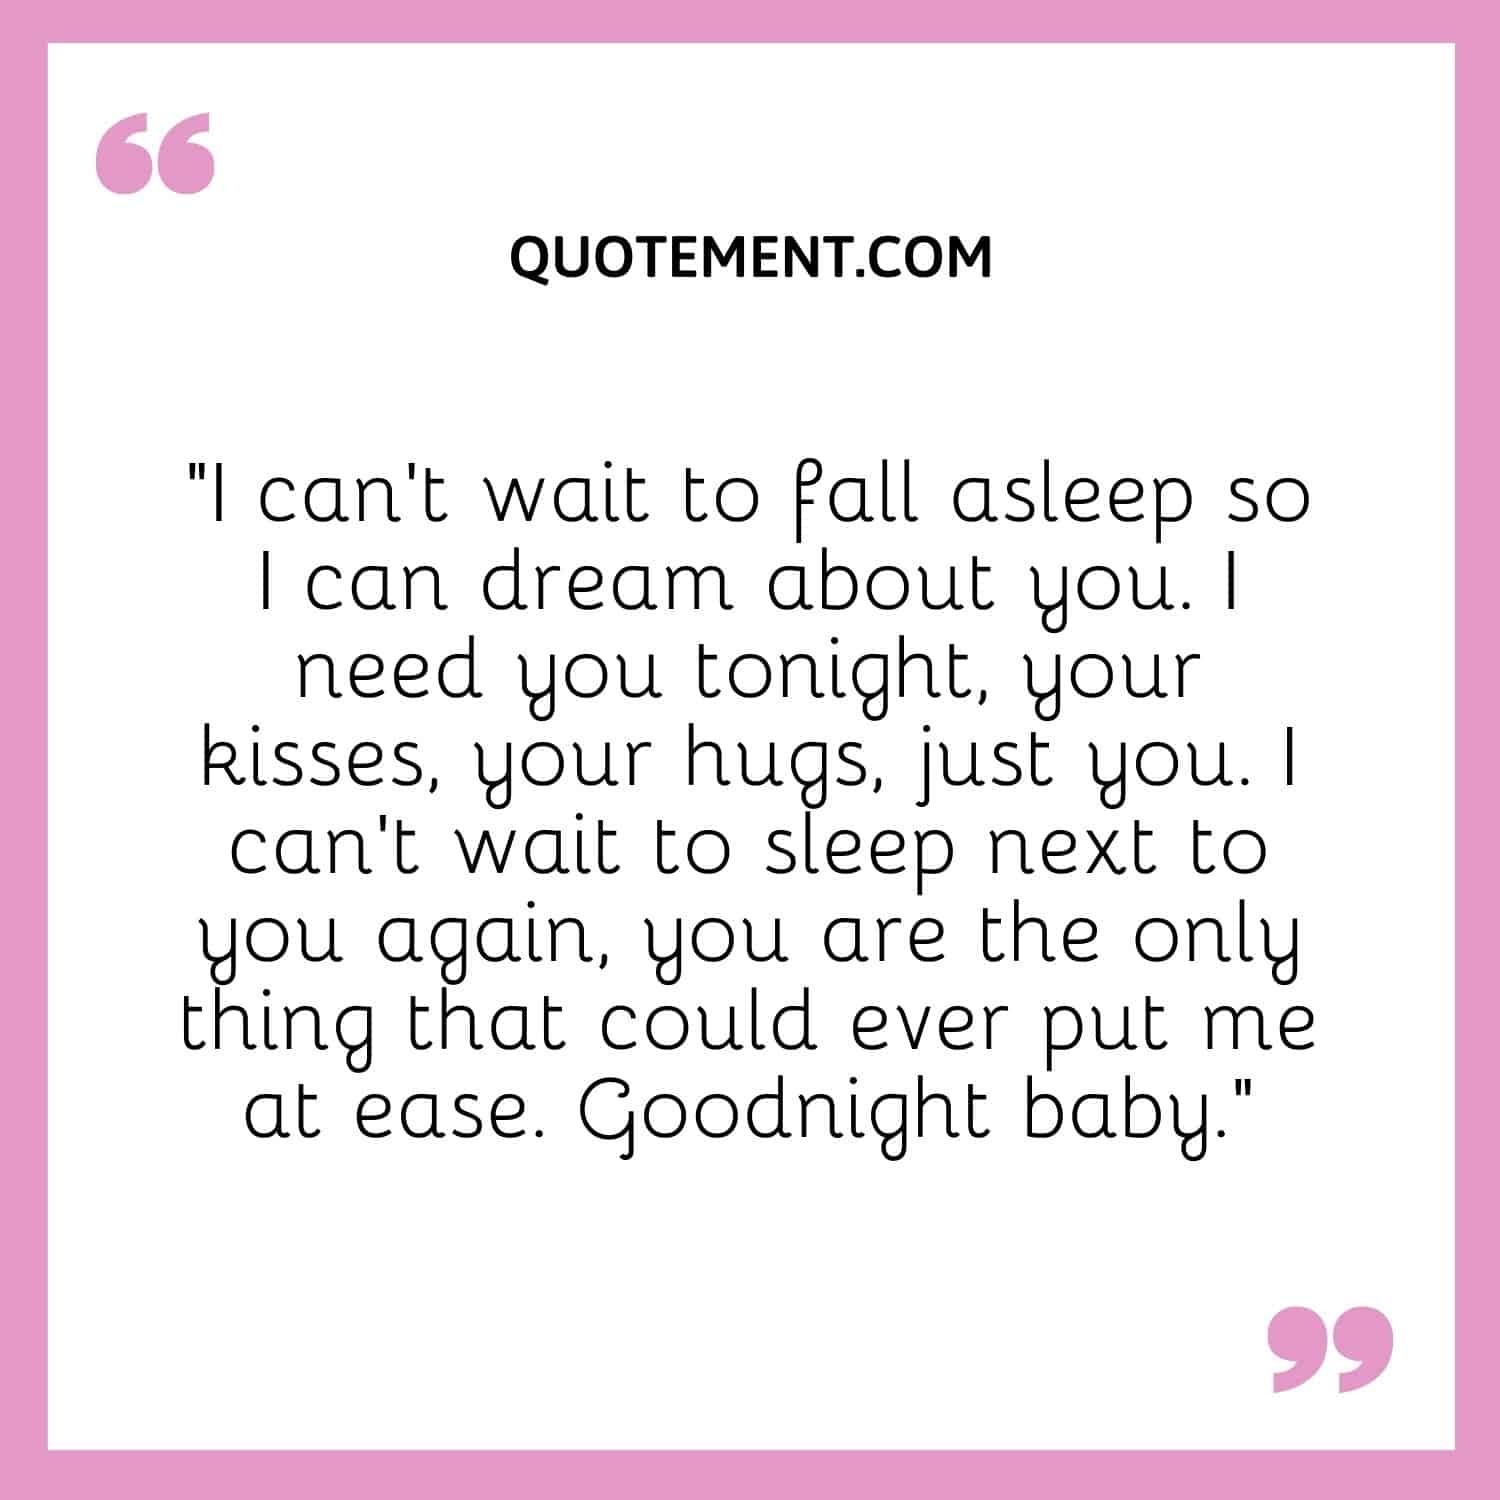 “I can’t wait to fall asleep so I can dream about you. I need you tonight, your kisses, your hugs, just you.